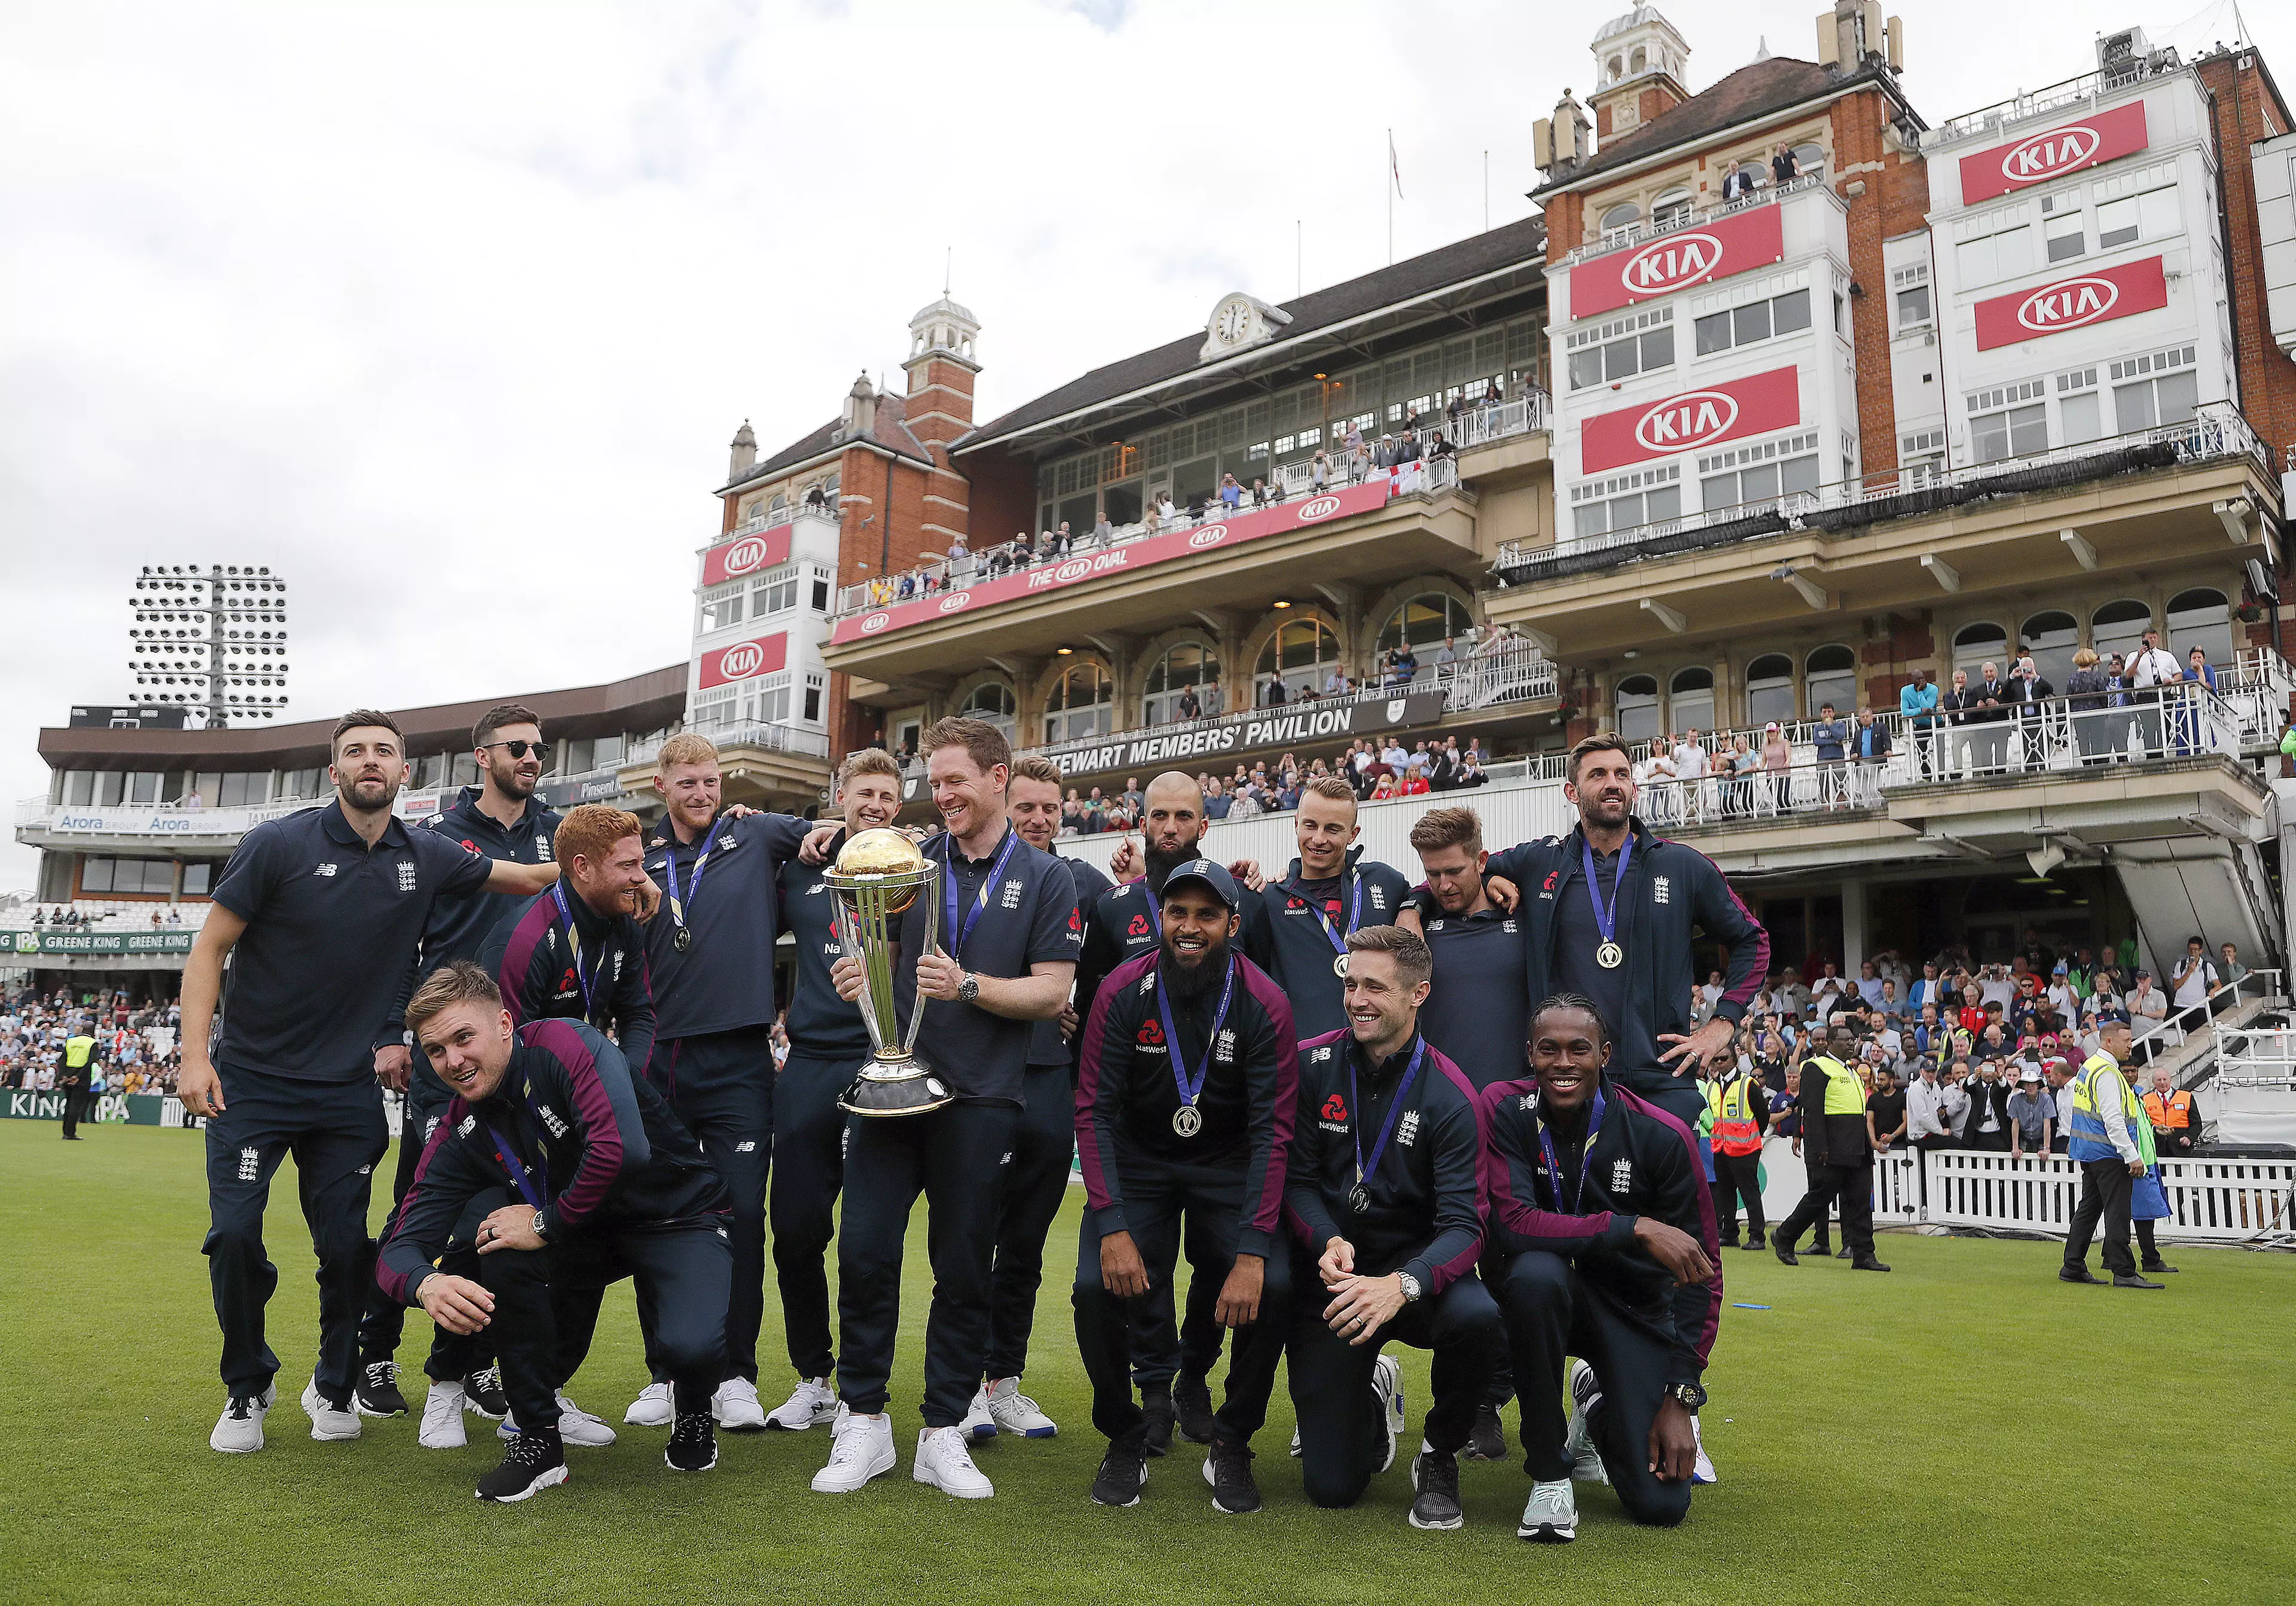 Eoin Morgan and his team celebrate at the Oval. Image: PA Images